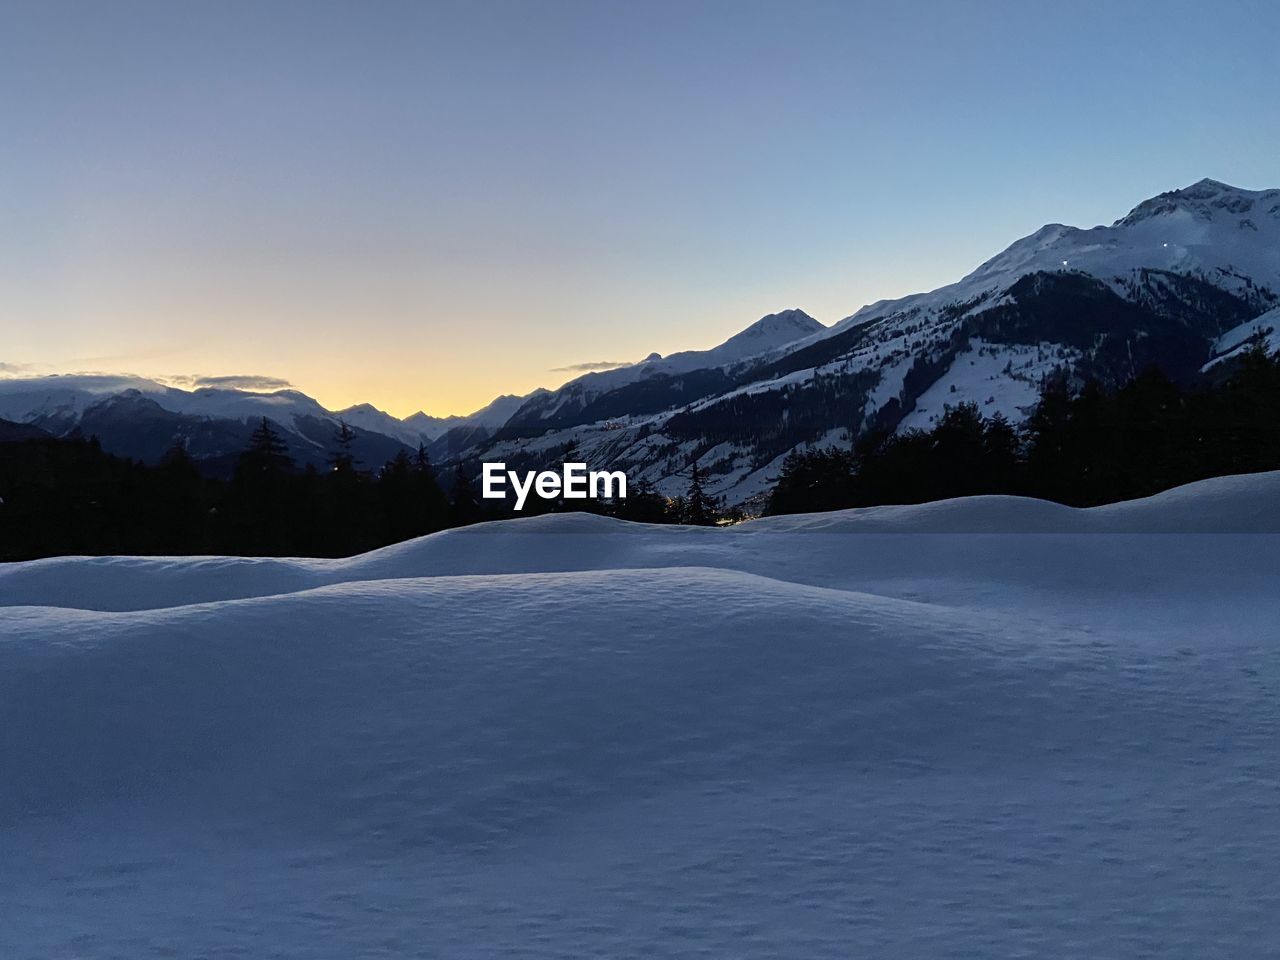 SCENIC VIEW OF SNOW COVERED MOUNTAINS AGAINST SKY DURING WINTER